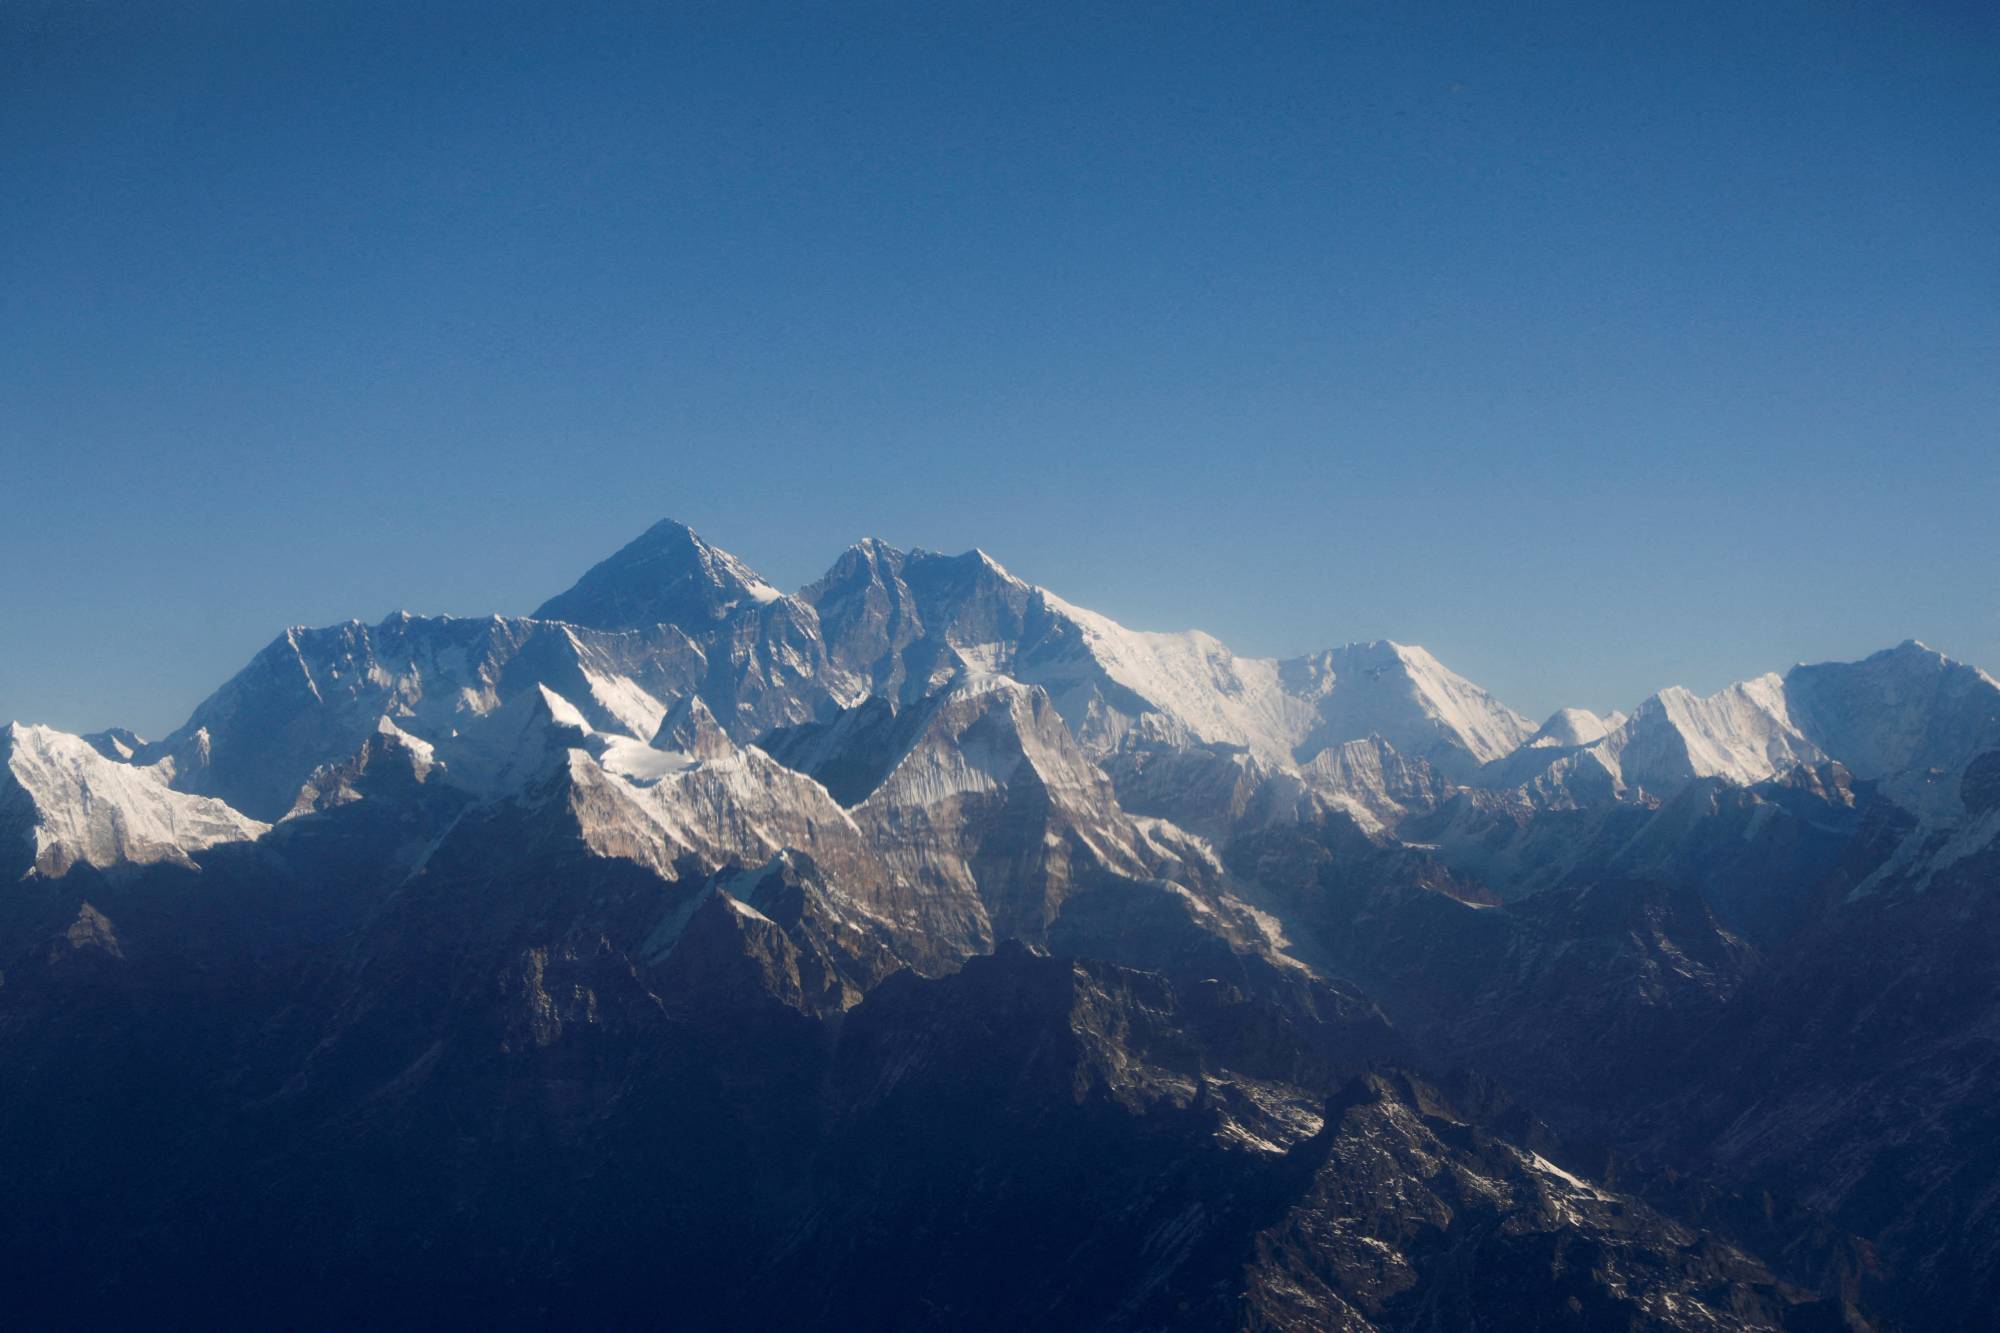 Mount Everest was first scaled 70 years ago. Climbers celebrate the  milestone as climate change concerns grow